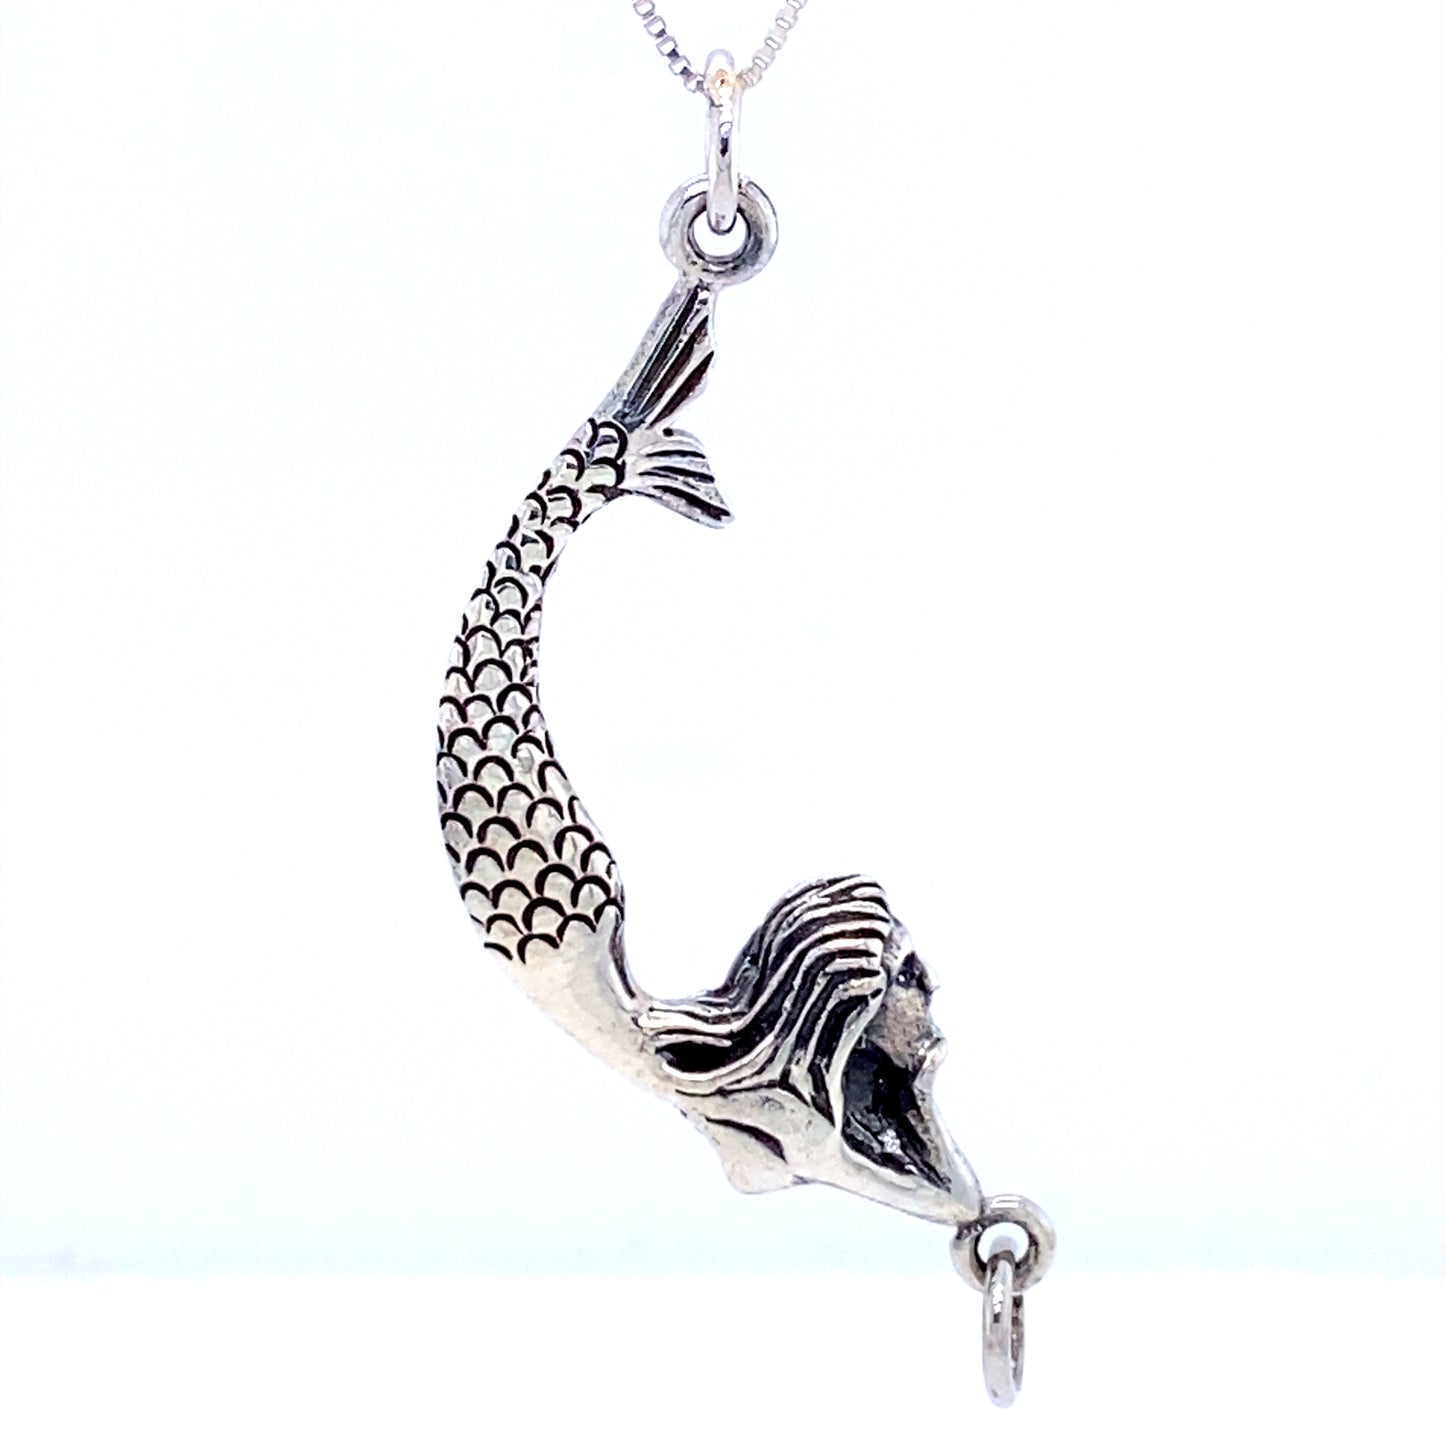 A Super Silver Lounging Mermaid Pendant necklace, inspired by the sea goddess, hanging gracefully from a chain.